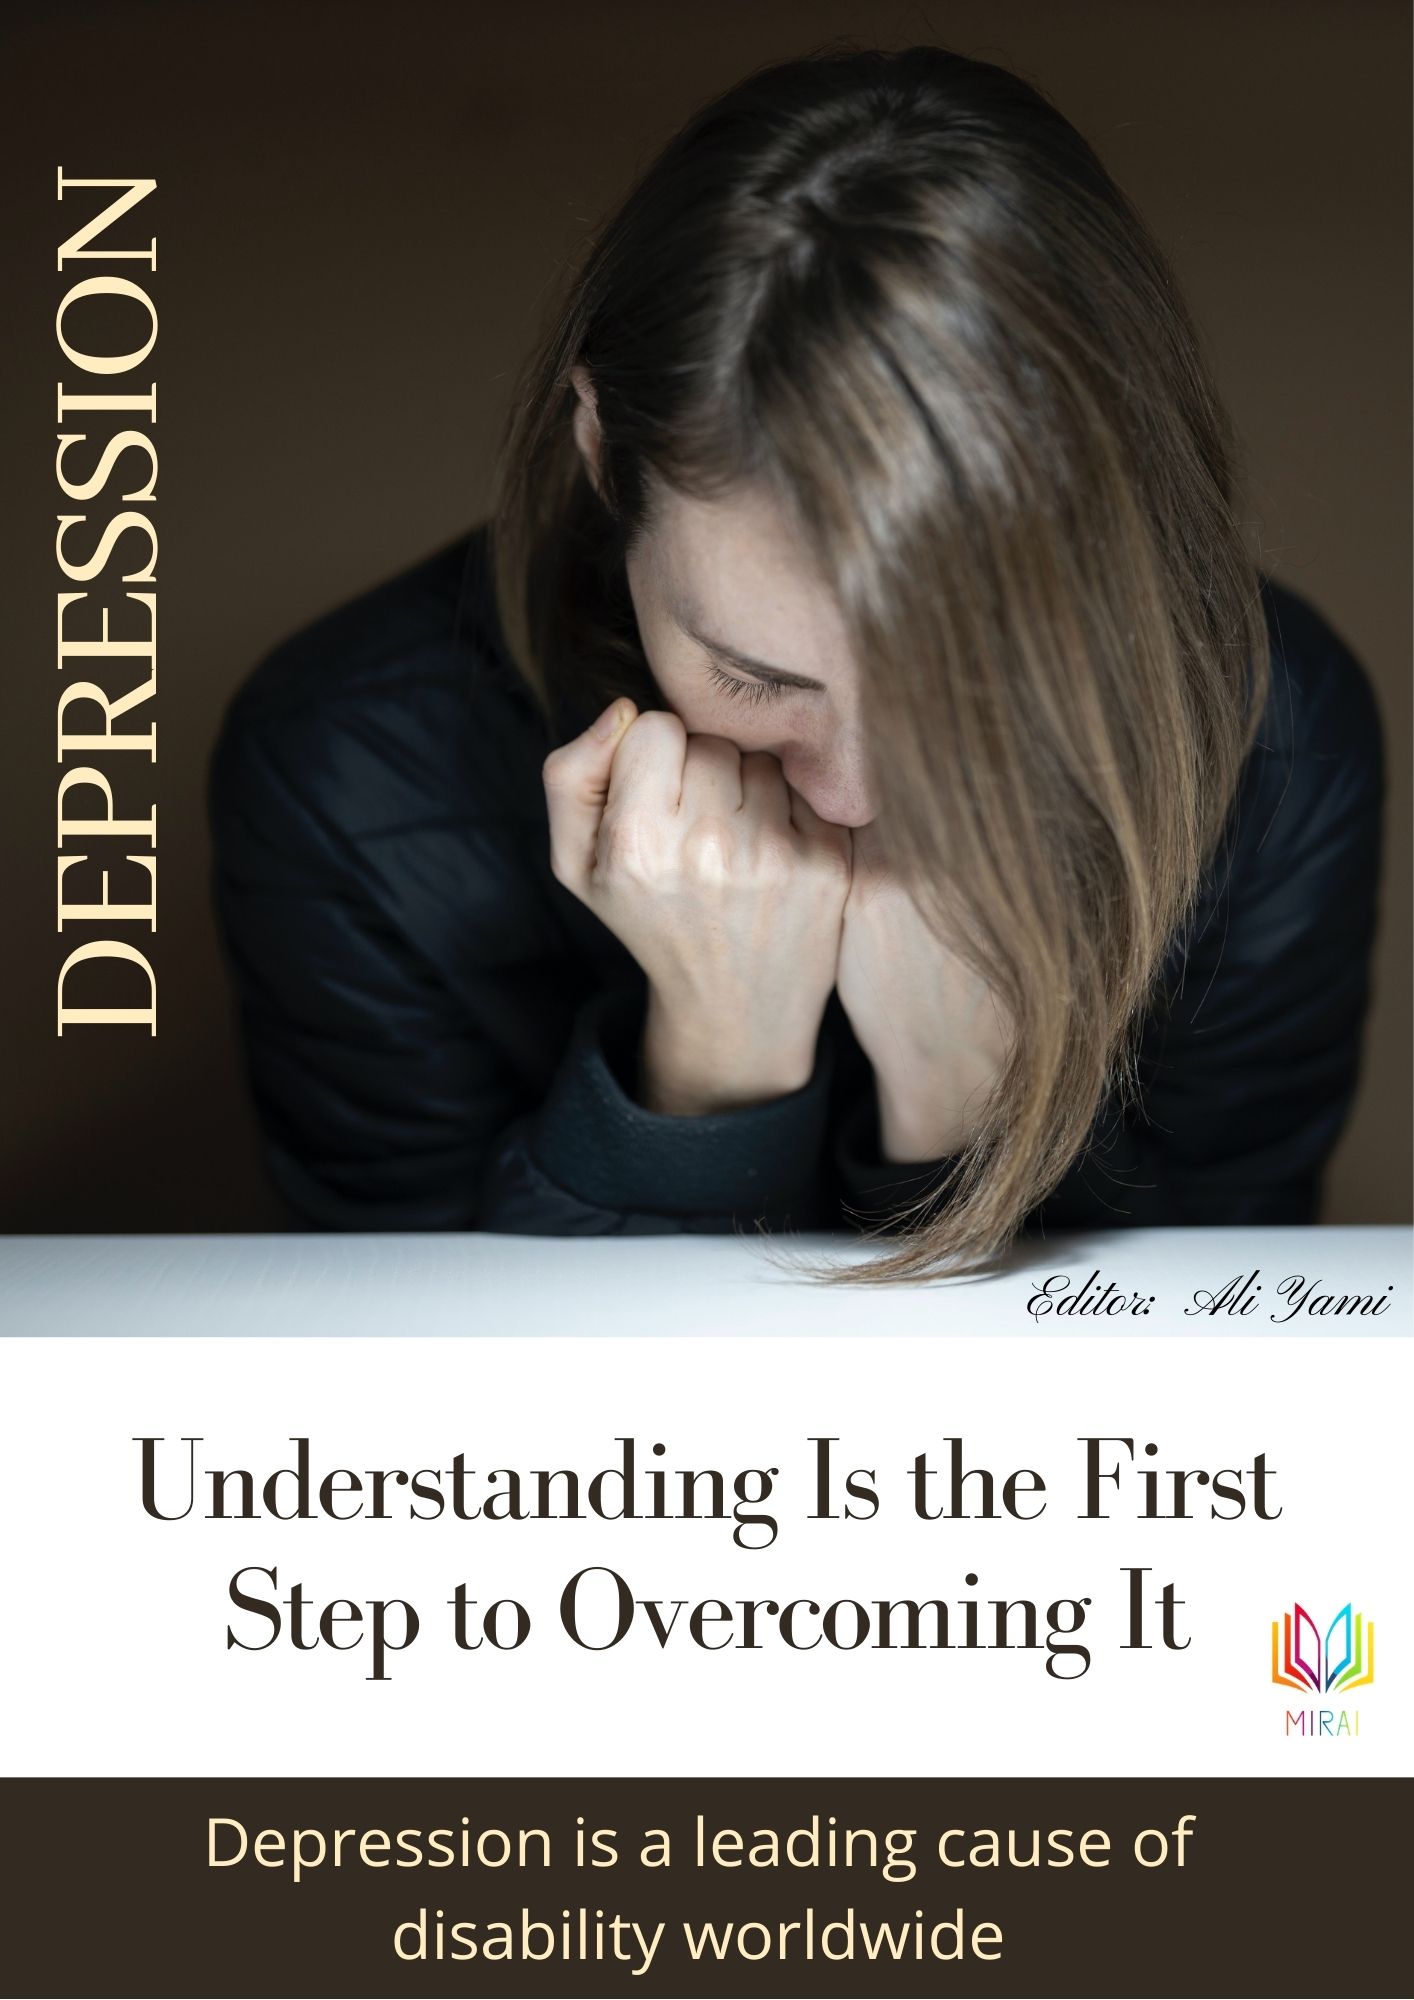 Ebook "Depression", Understanding about Depression with the objective of how to recognize people with depression and how to help them.